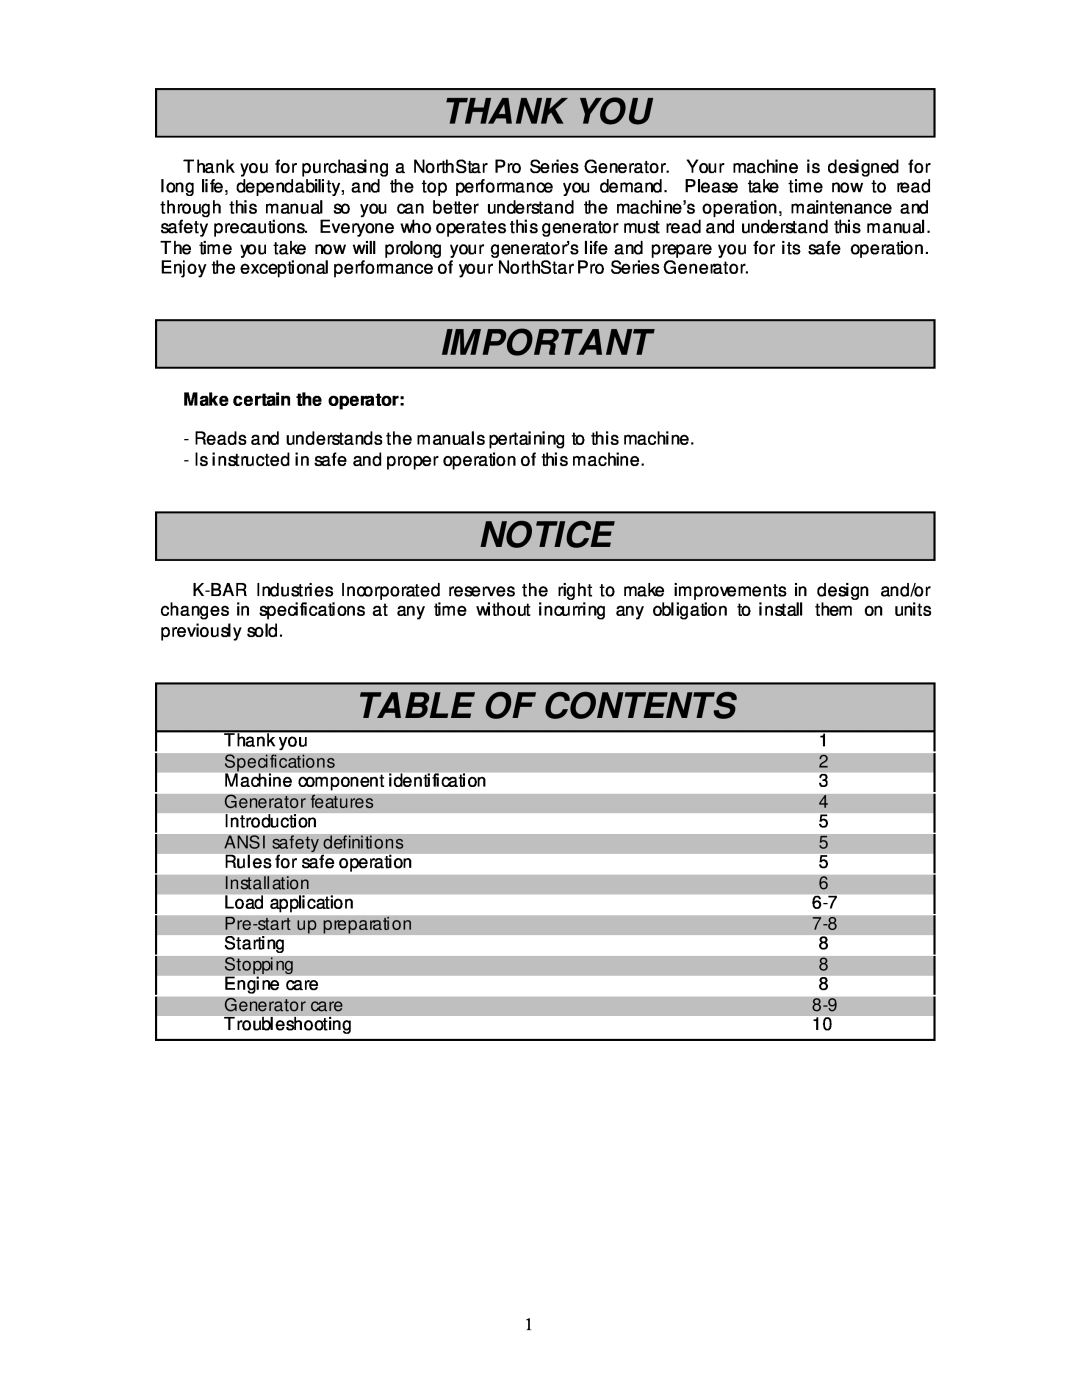 North Star 10000 PPG owner manual Thank You, Table Of Contents, Make certain the operator 